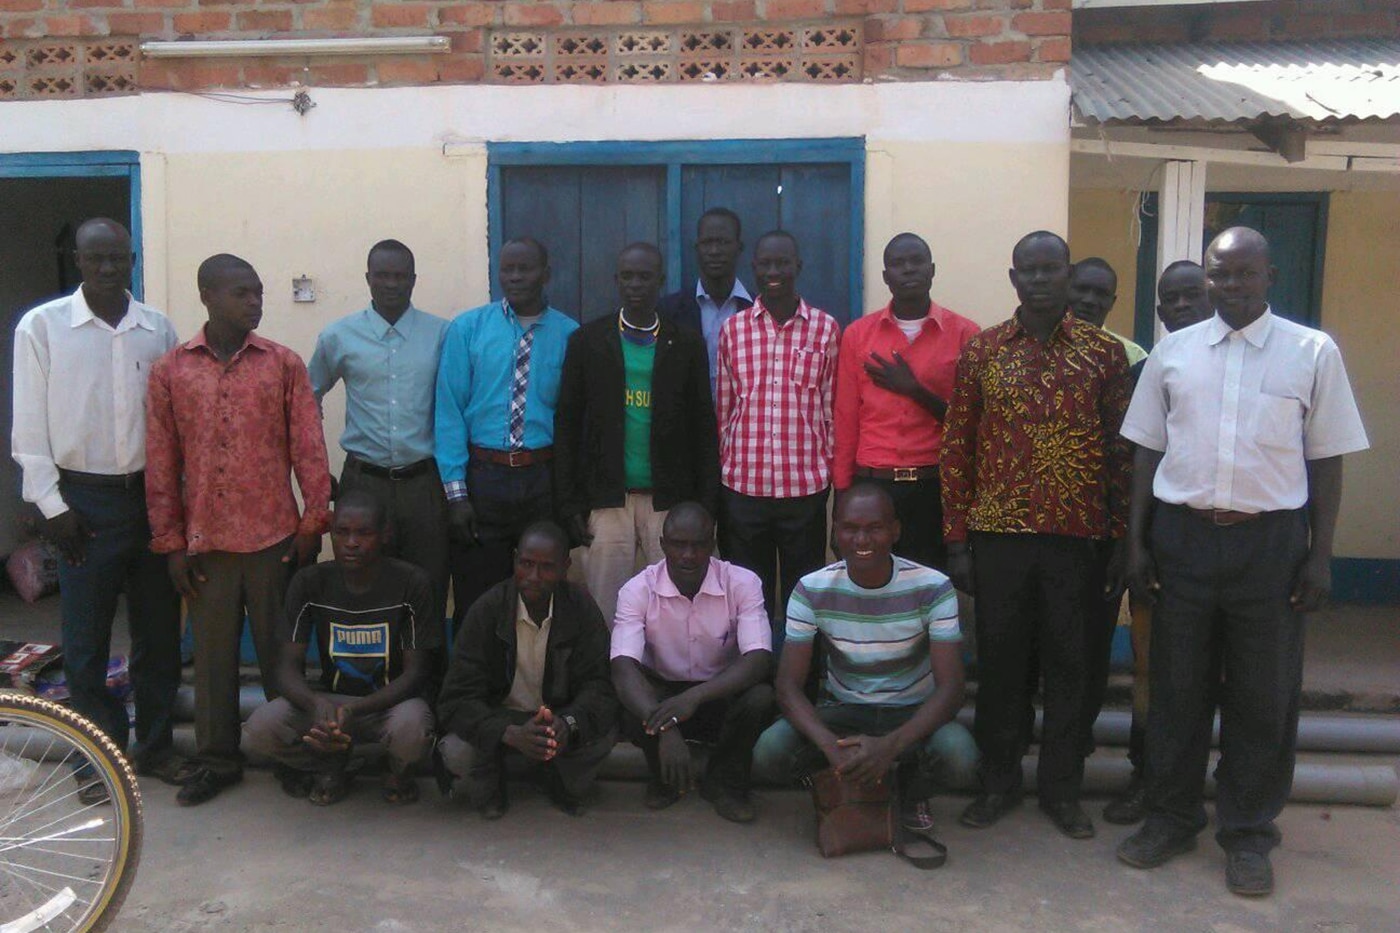 Students arrive at the Concordia Lutheran Institute for the Holy Ministry in South Sudan